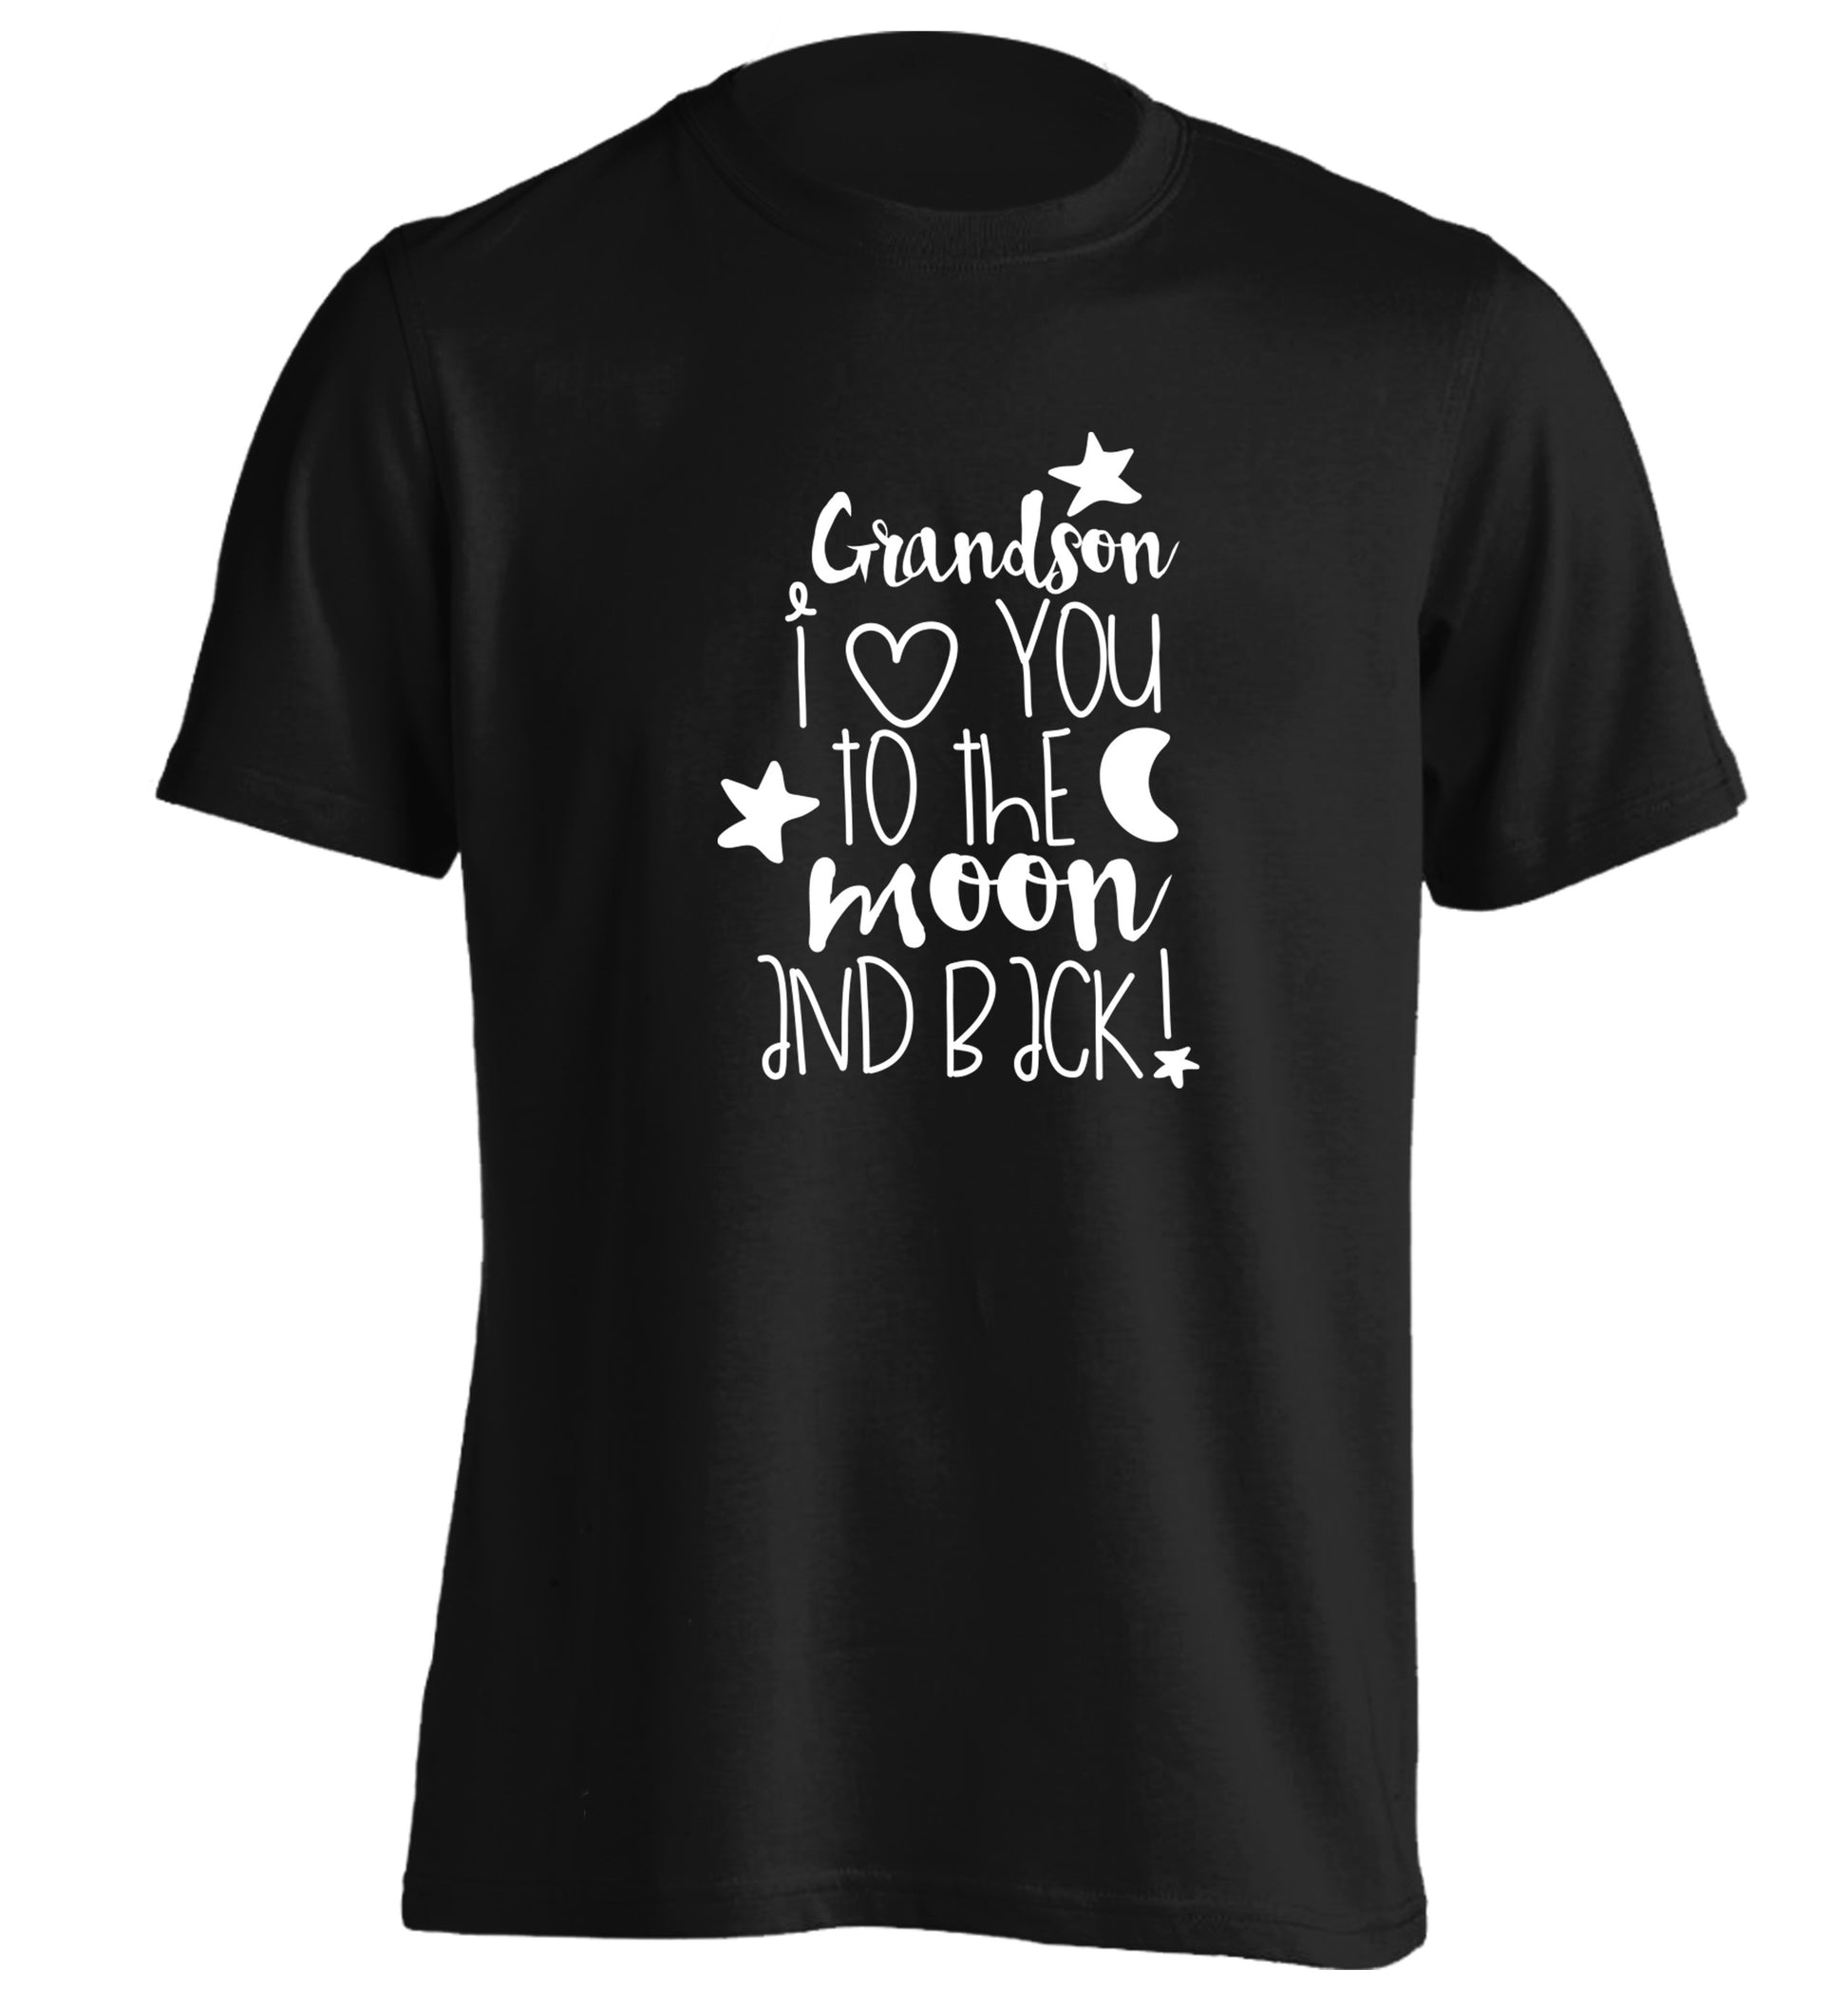 Grandson I love you to the moon and back adults unisex black Tshirt 2XL